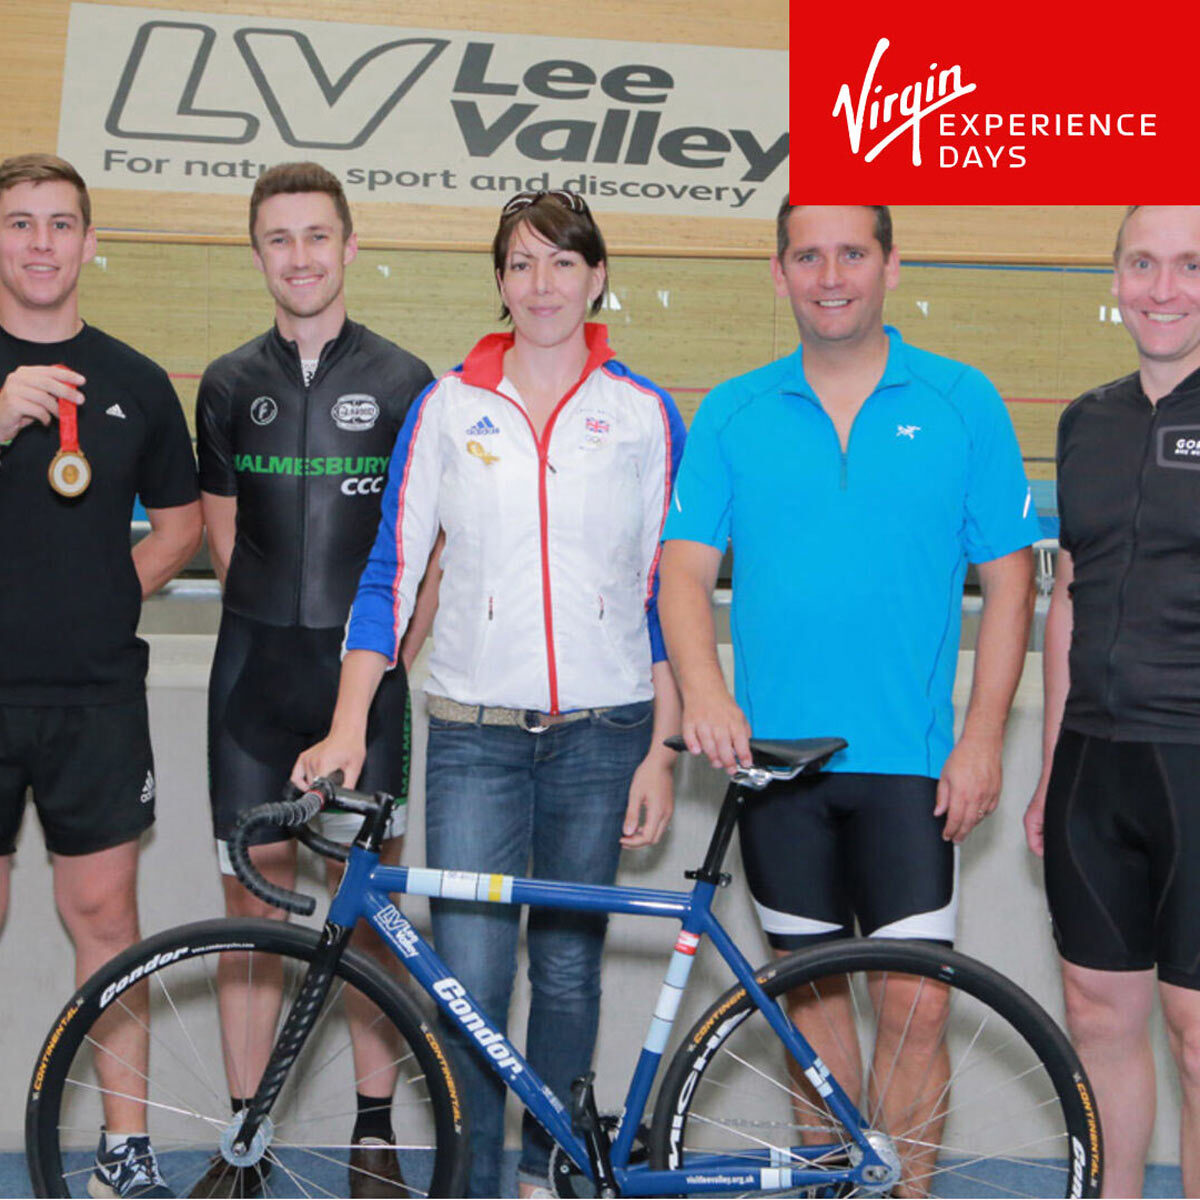 Buy Virgin Experience Velodrome Cycling Experience with GB Gold Medalist Image3 at Costco.co.uk